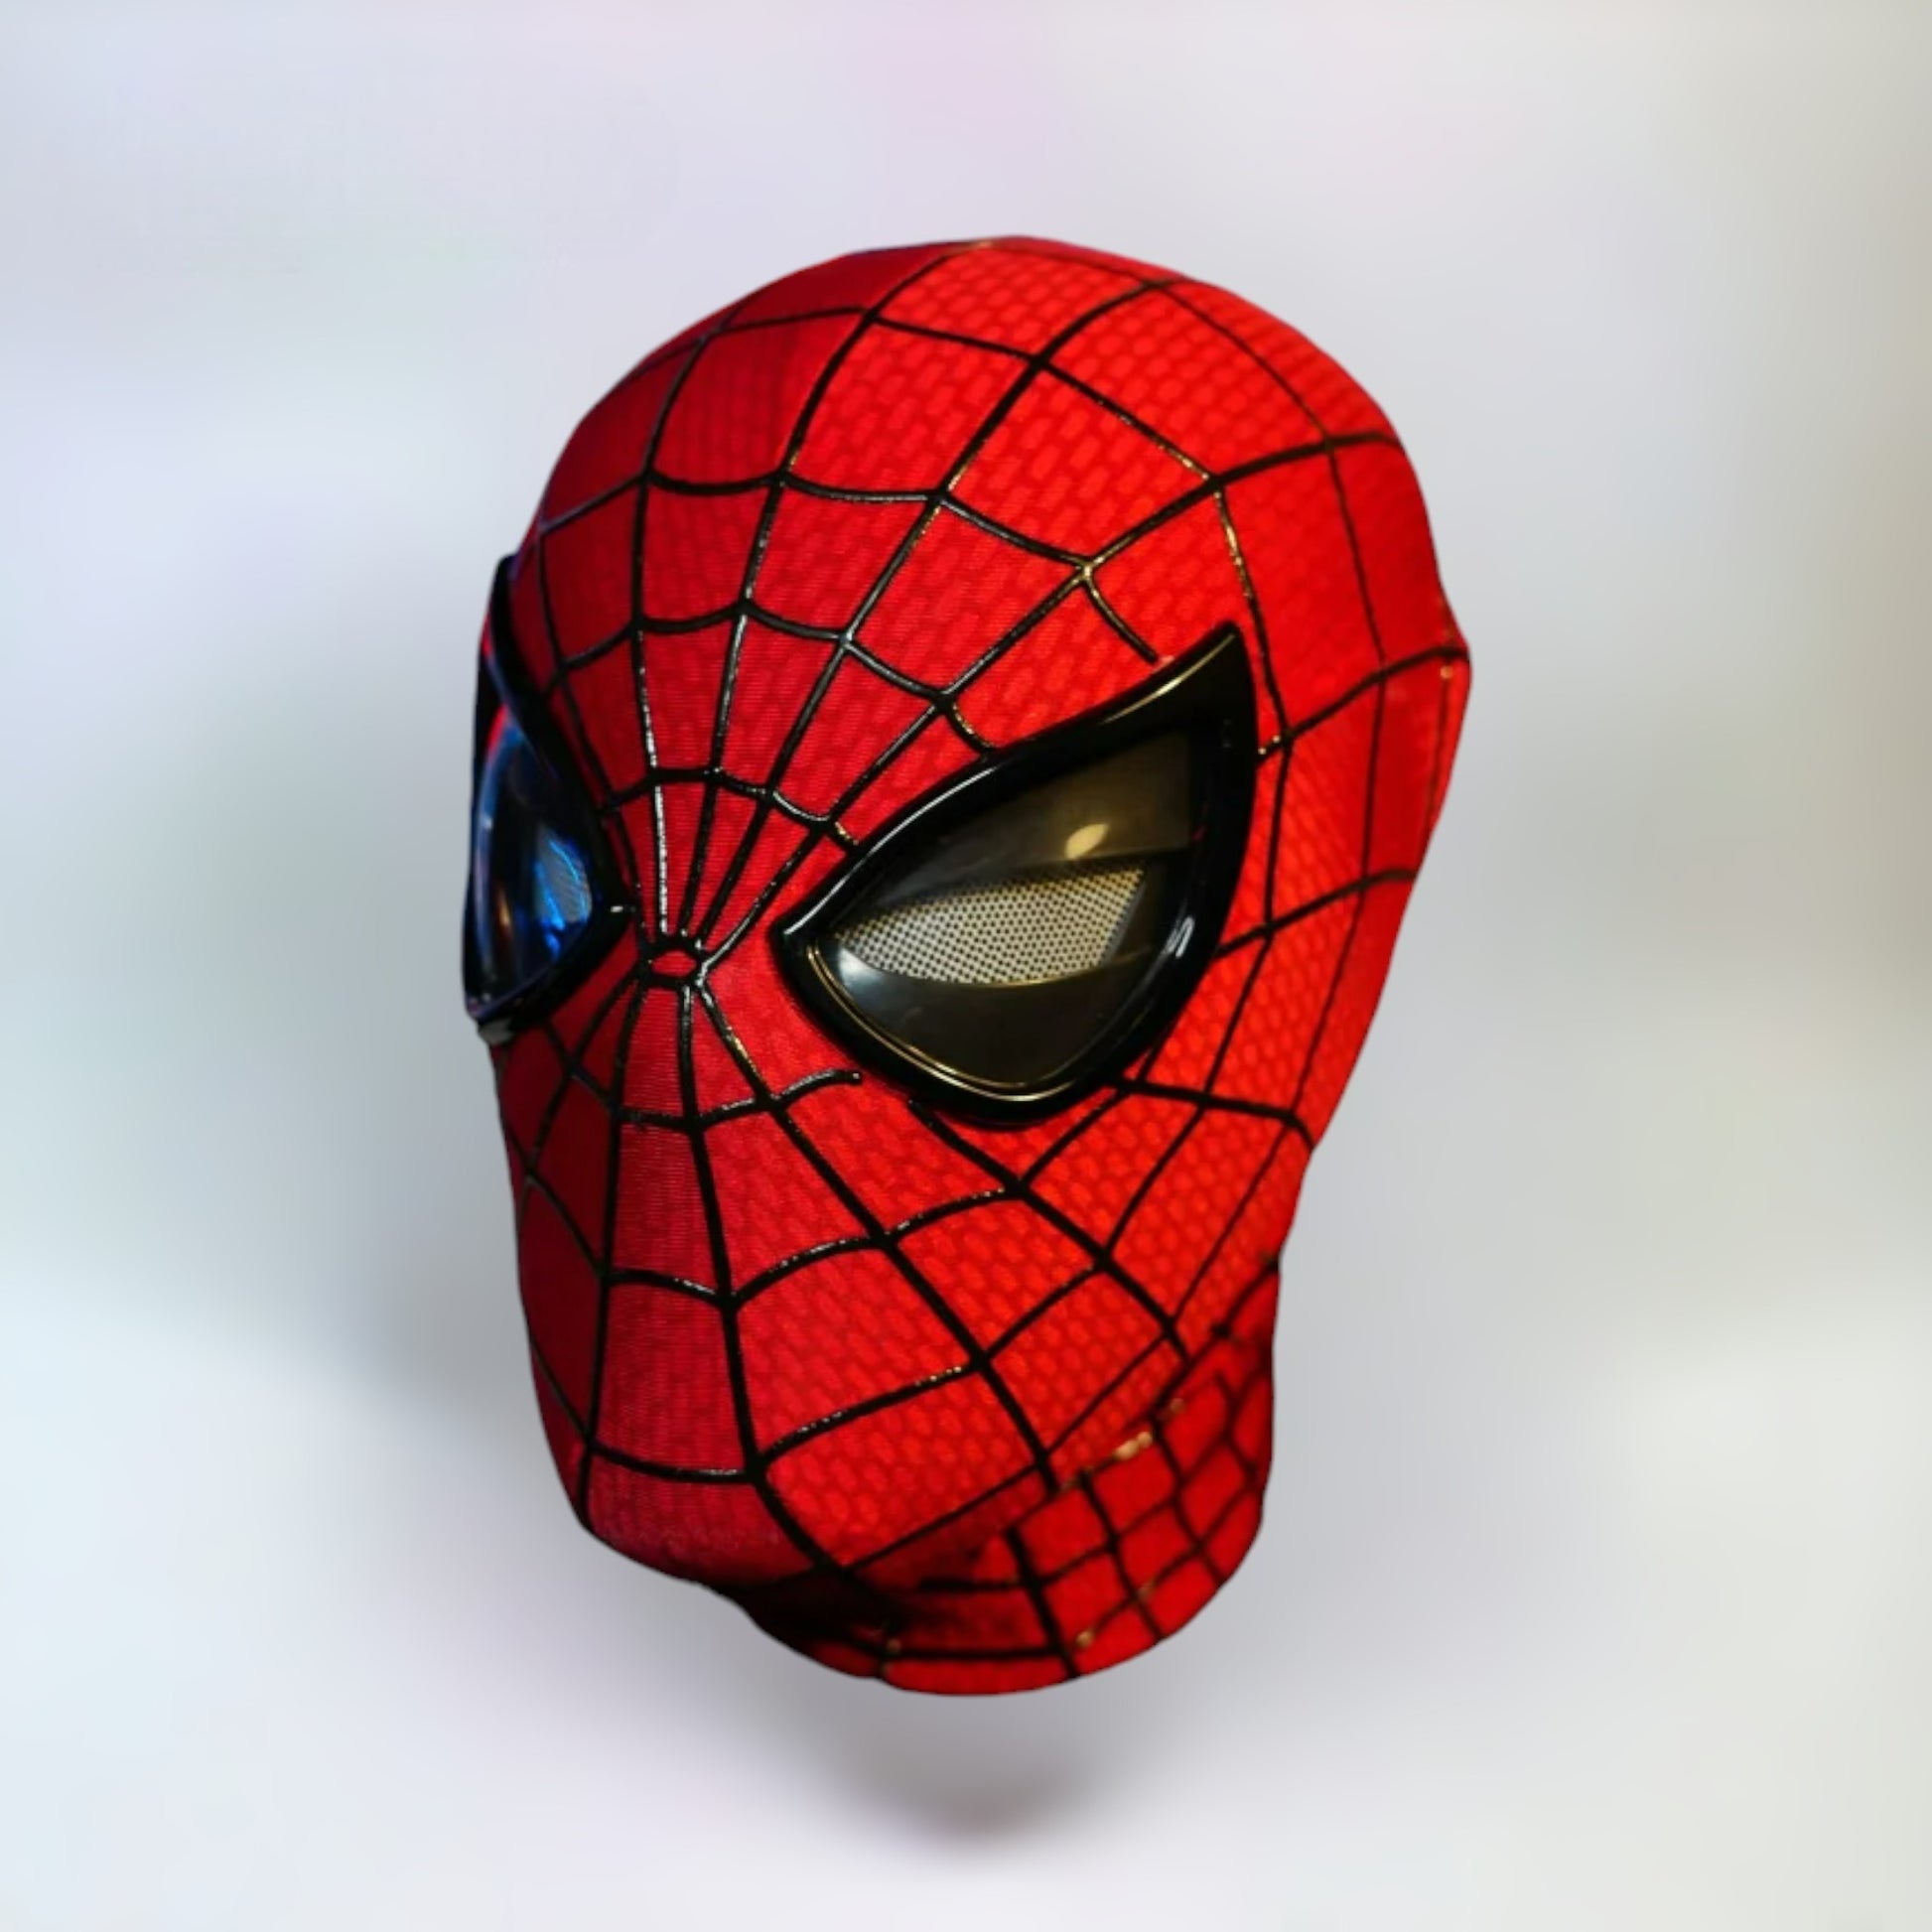 The Amazing Spiderman Mask with Blinking Movable Eyes Remote Controlled and LED Lights Side View. Spiderman mask with plain white background